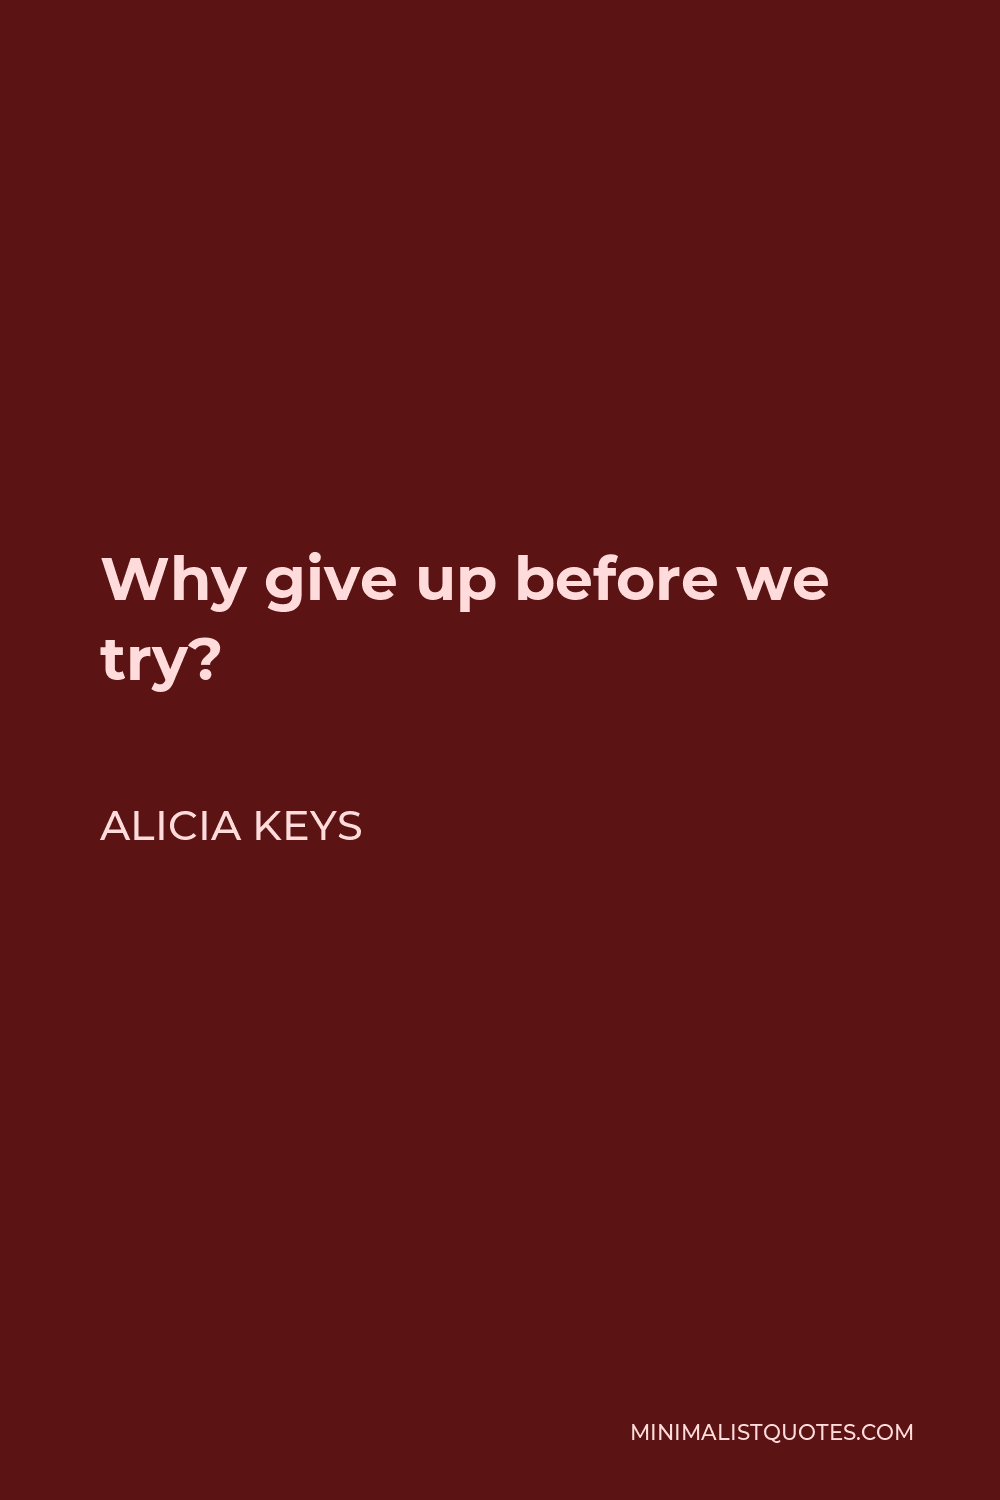 Alicia Keys Quote - Why give up before we try?